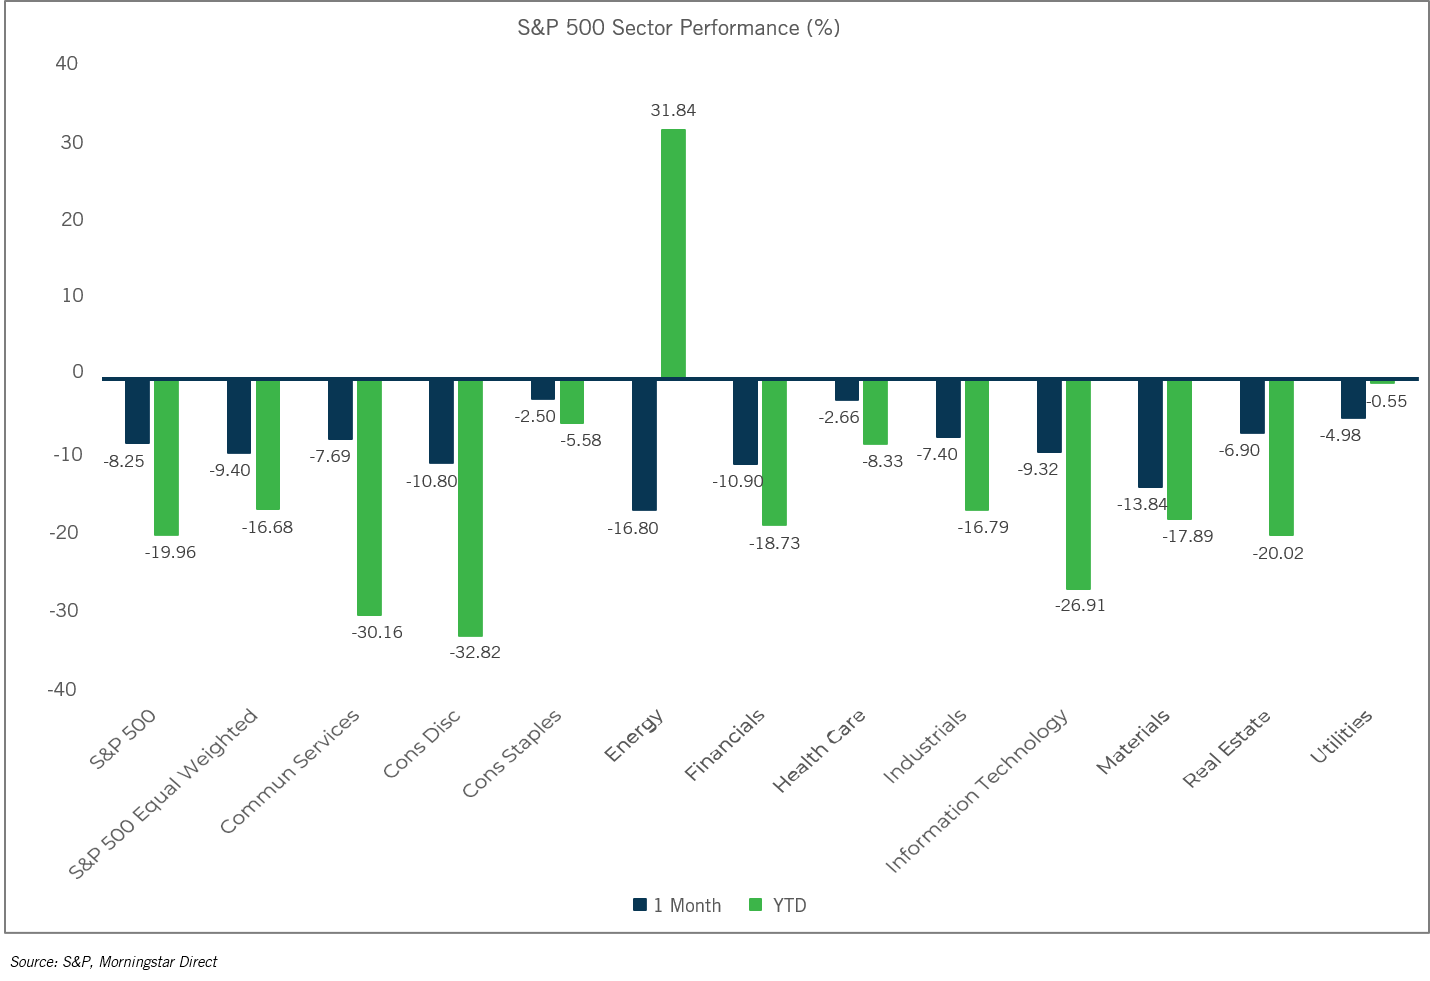 Sector Performance: S&P 500 - June 2022